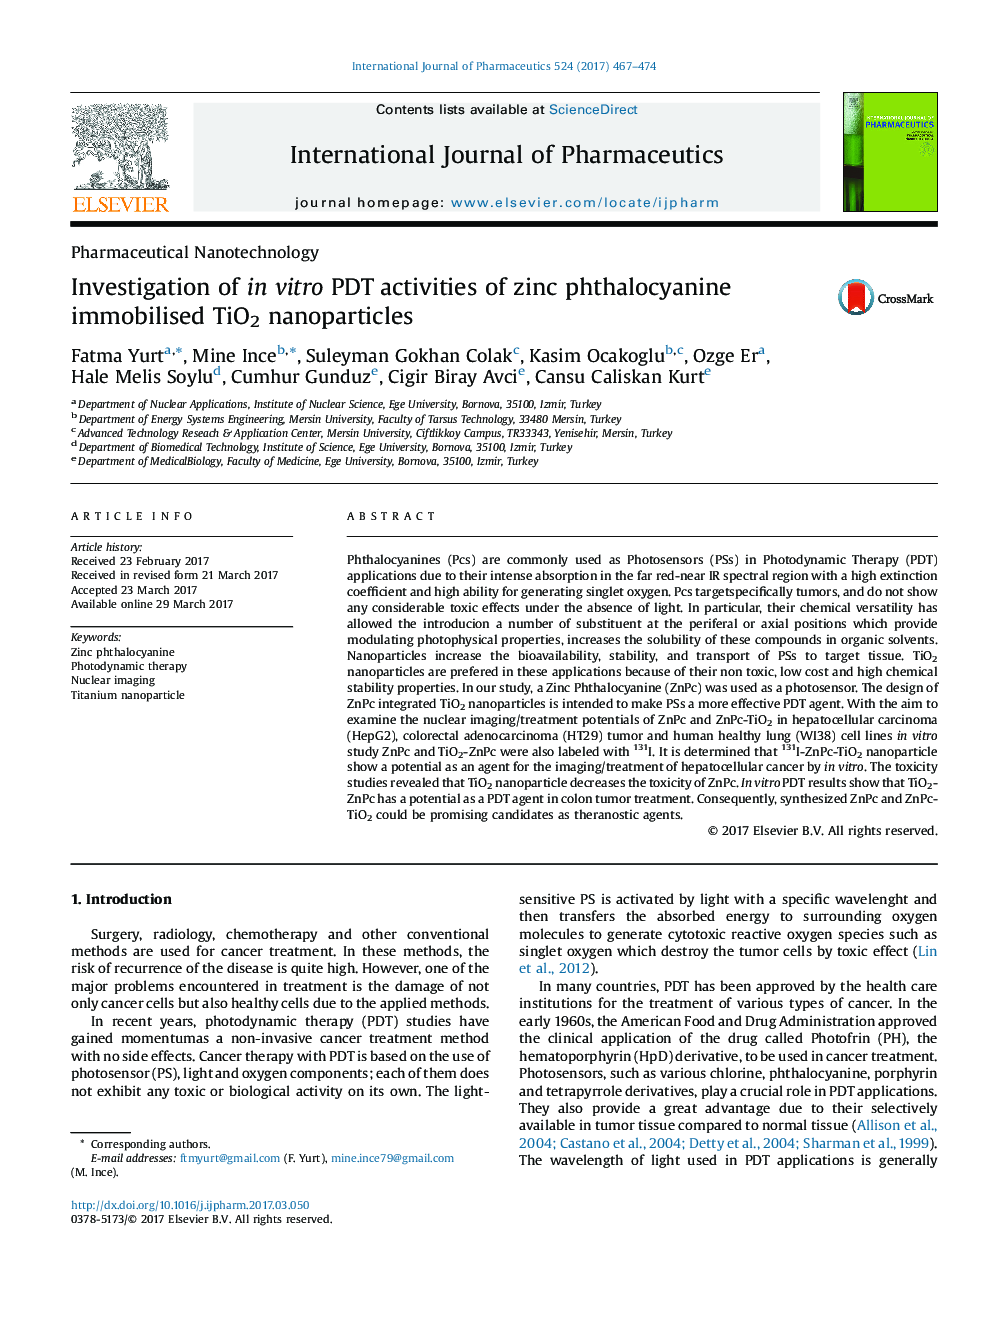 Investigation of in vitro PDT activities of zinc phthalocyanine immobilised TiO2 nanoparticles